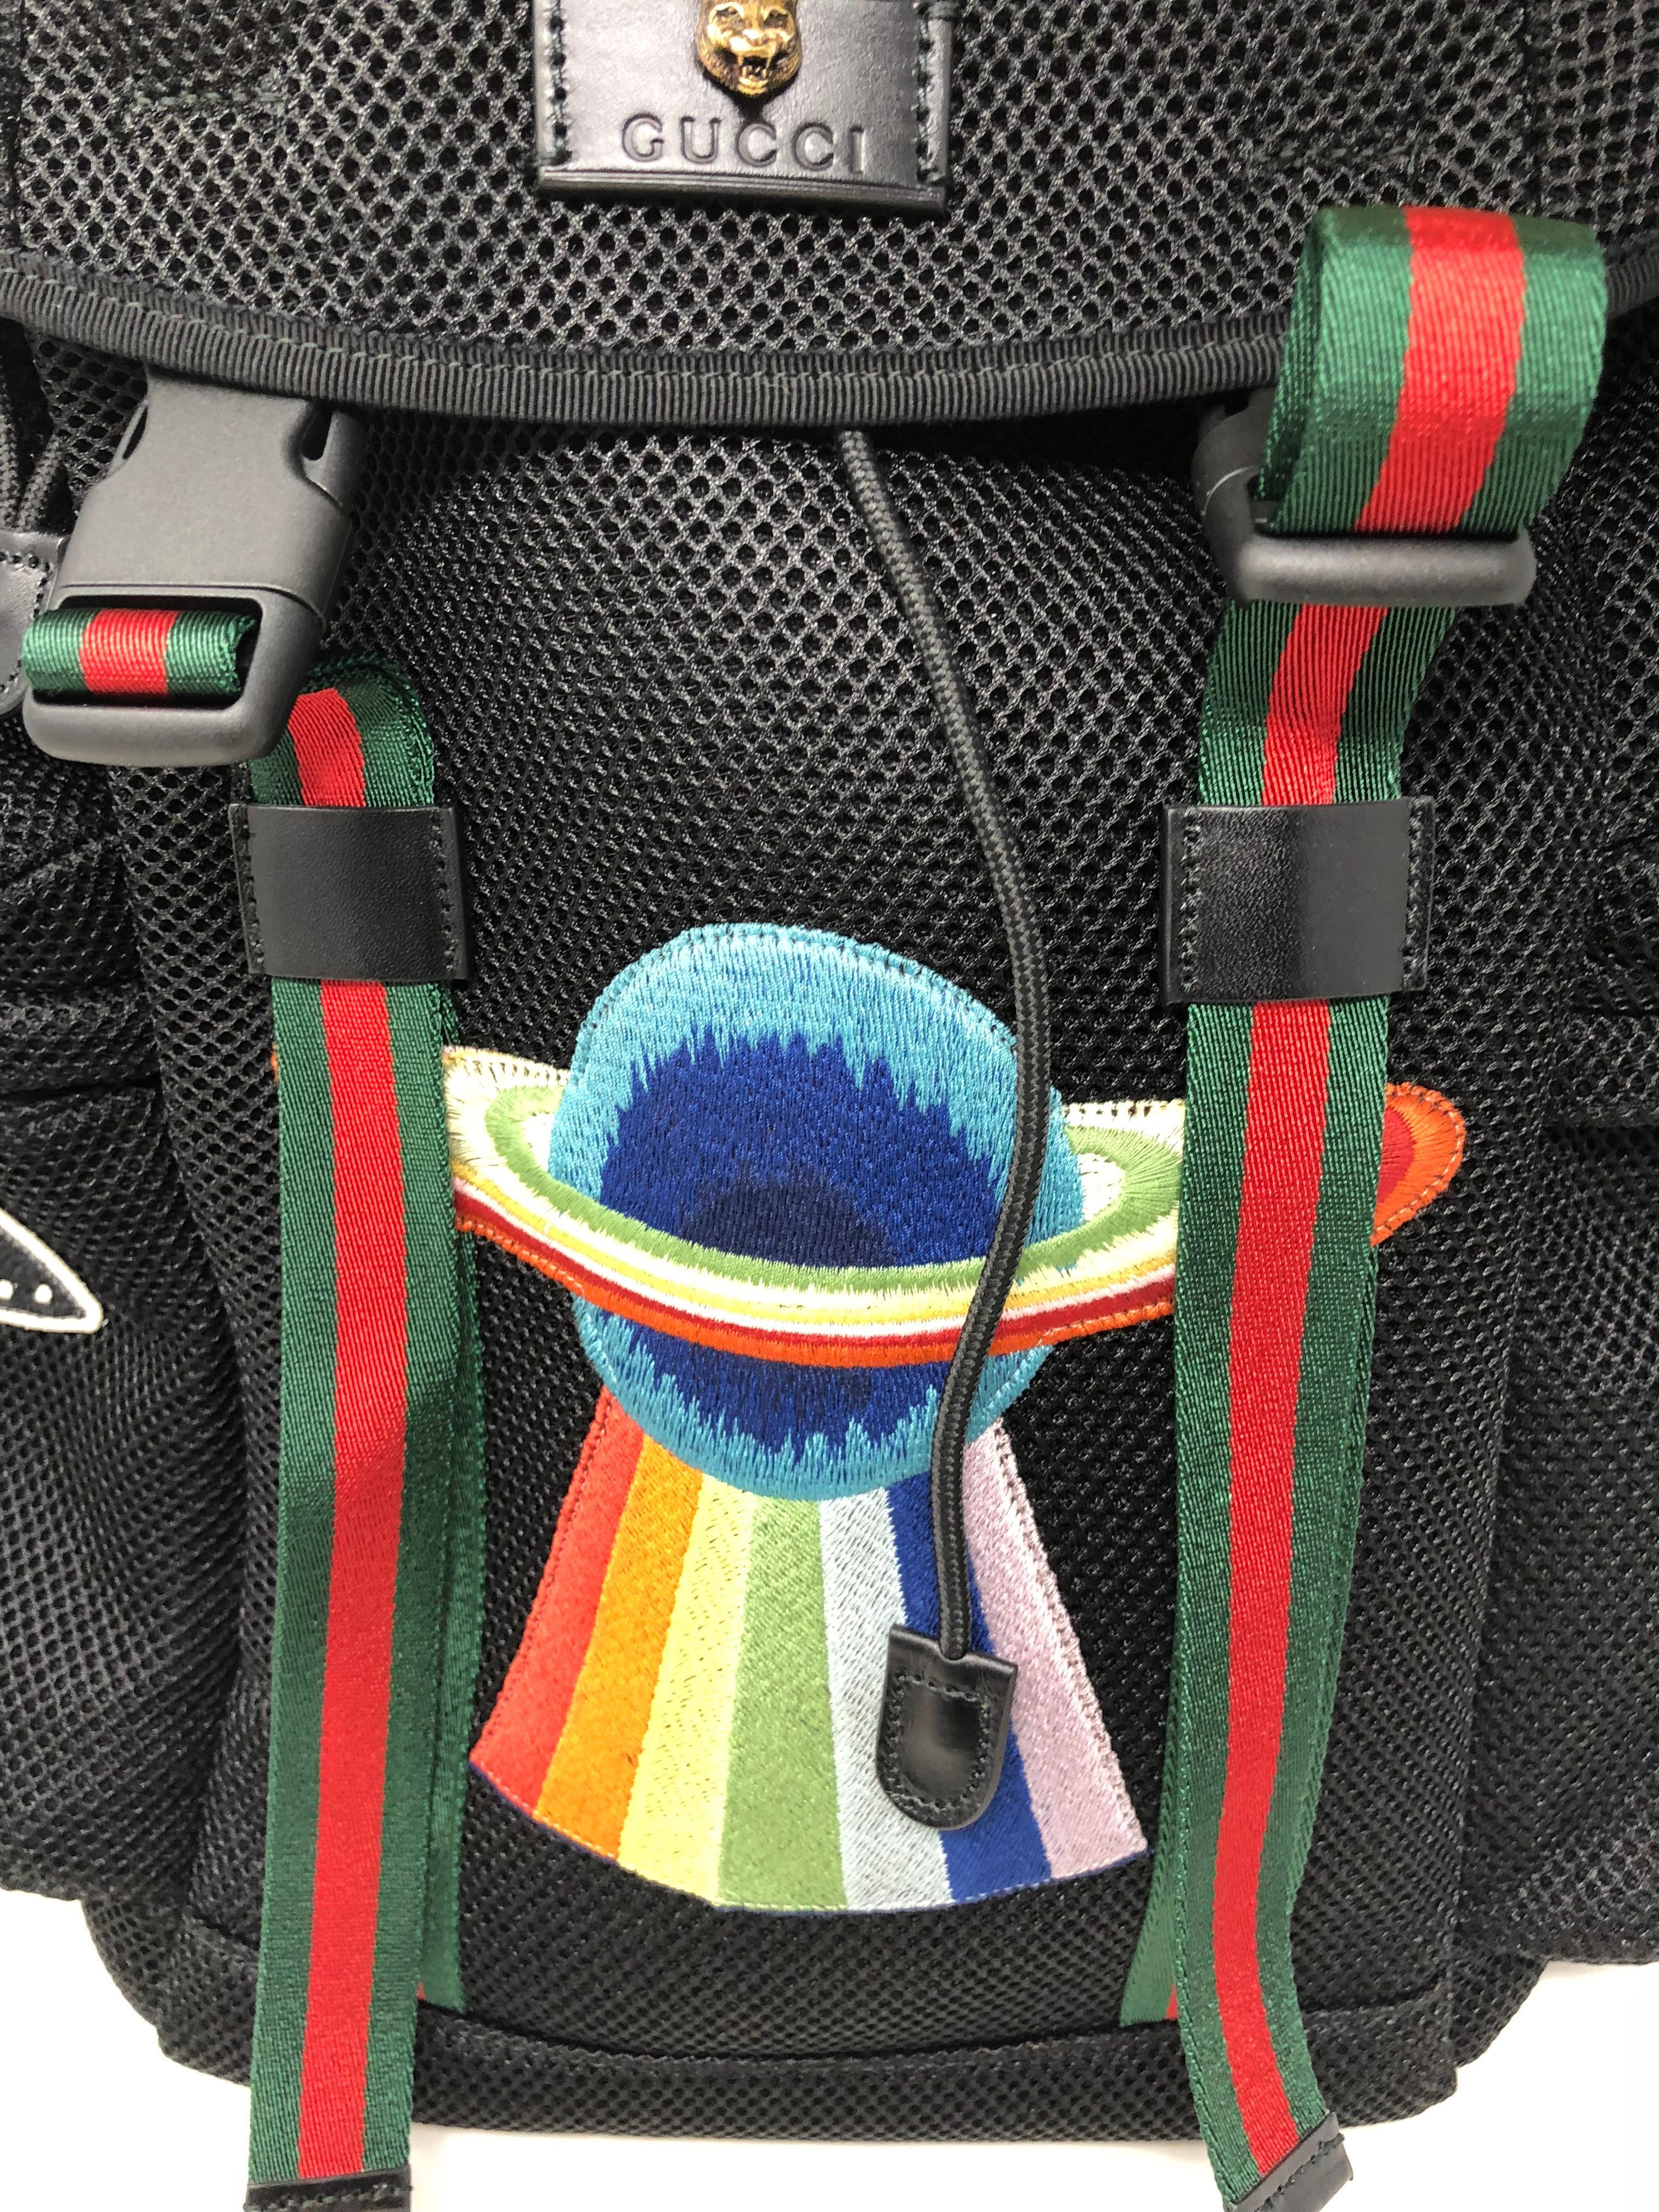 Gucci Hollywood Backpack. Woven nylon with embroidery Backpack. Brand new never used. Unisex and great for daily wear. Guaranteed authentic. 